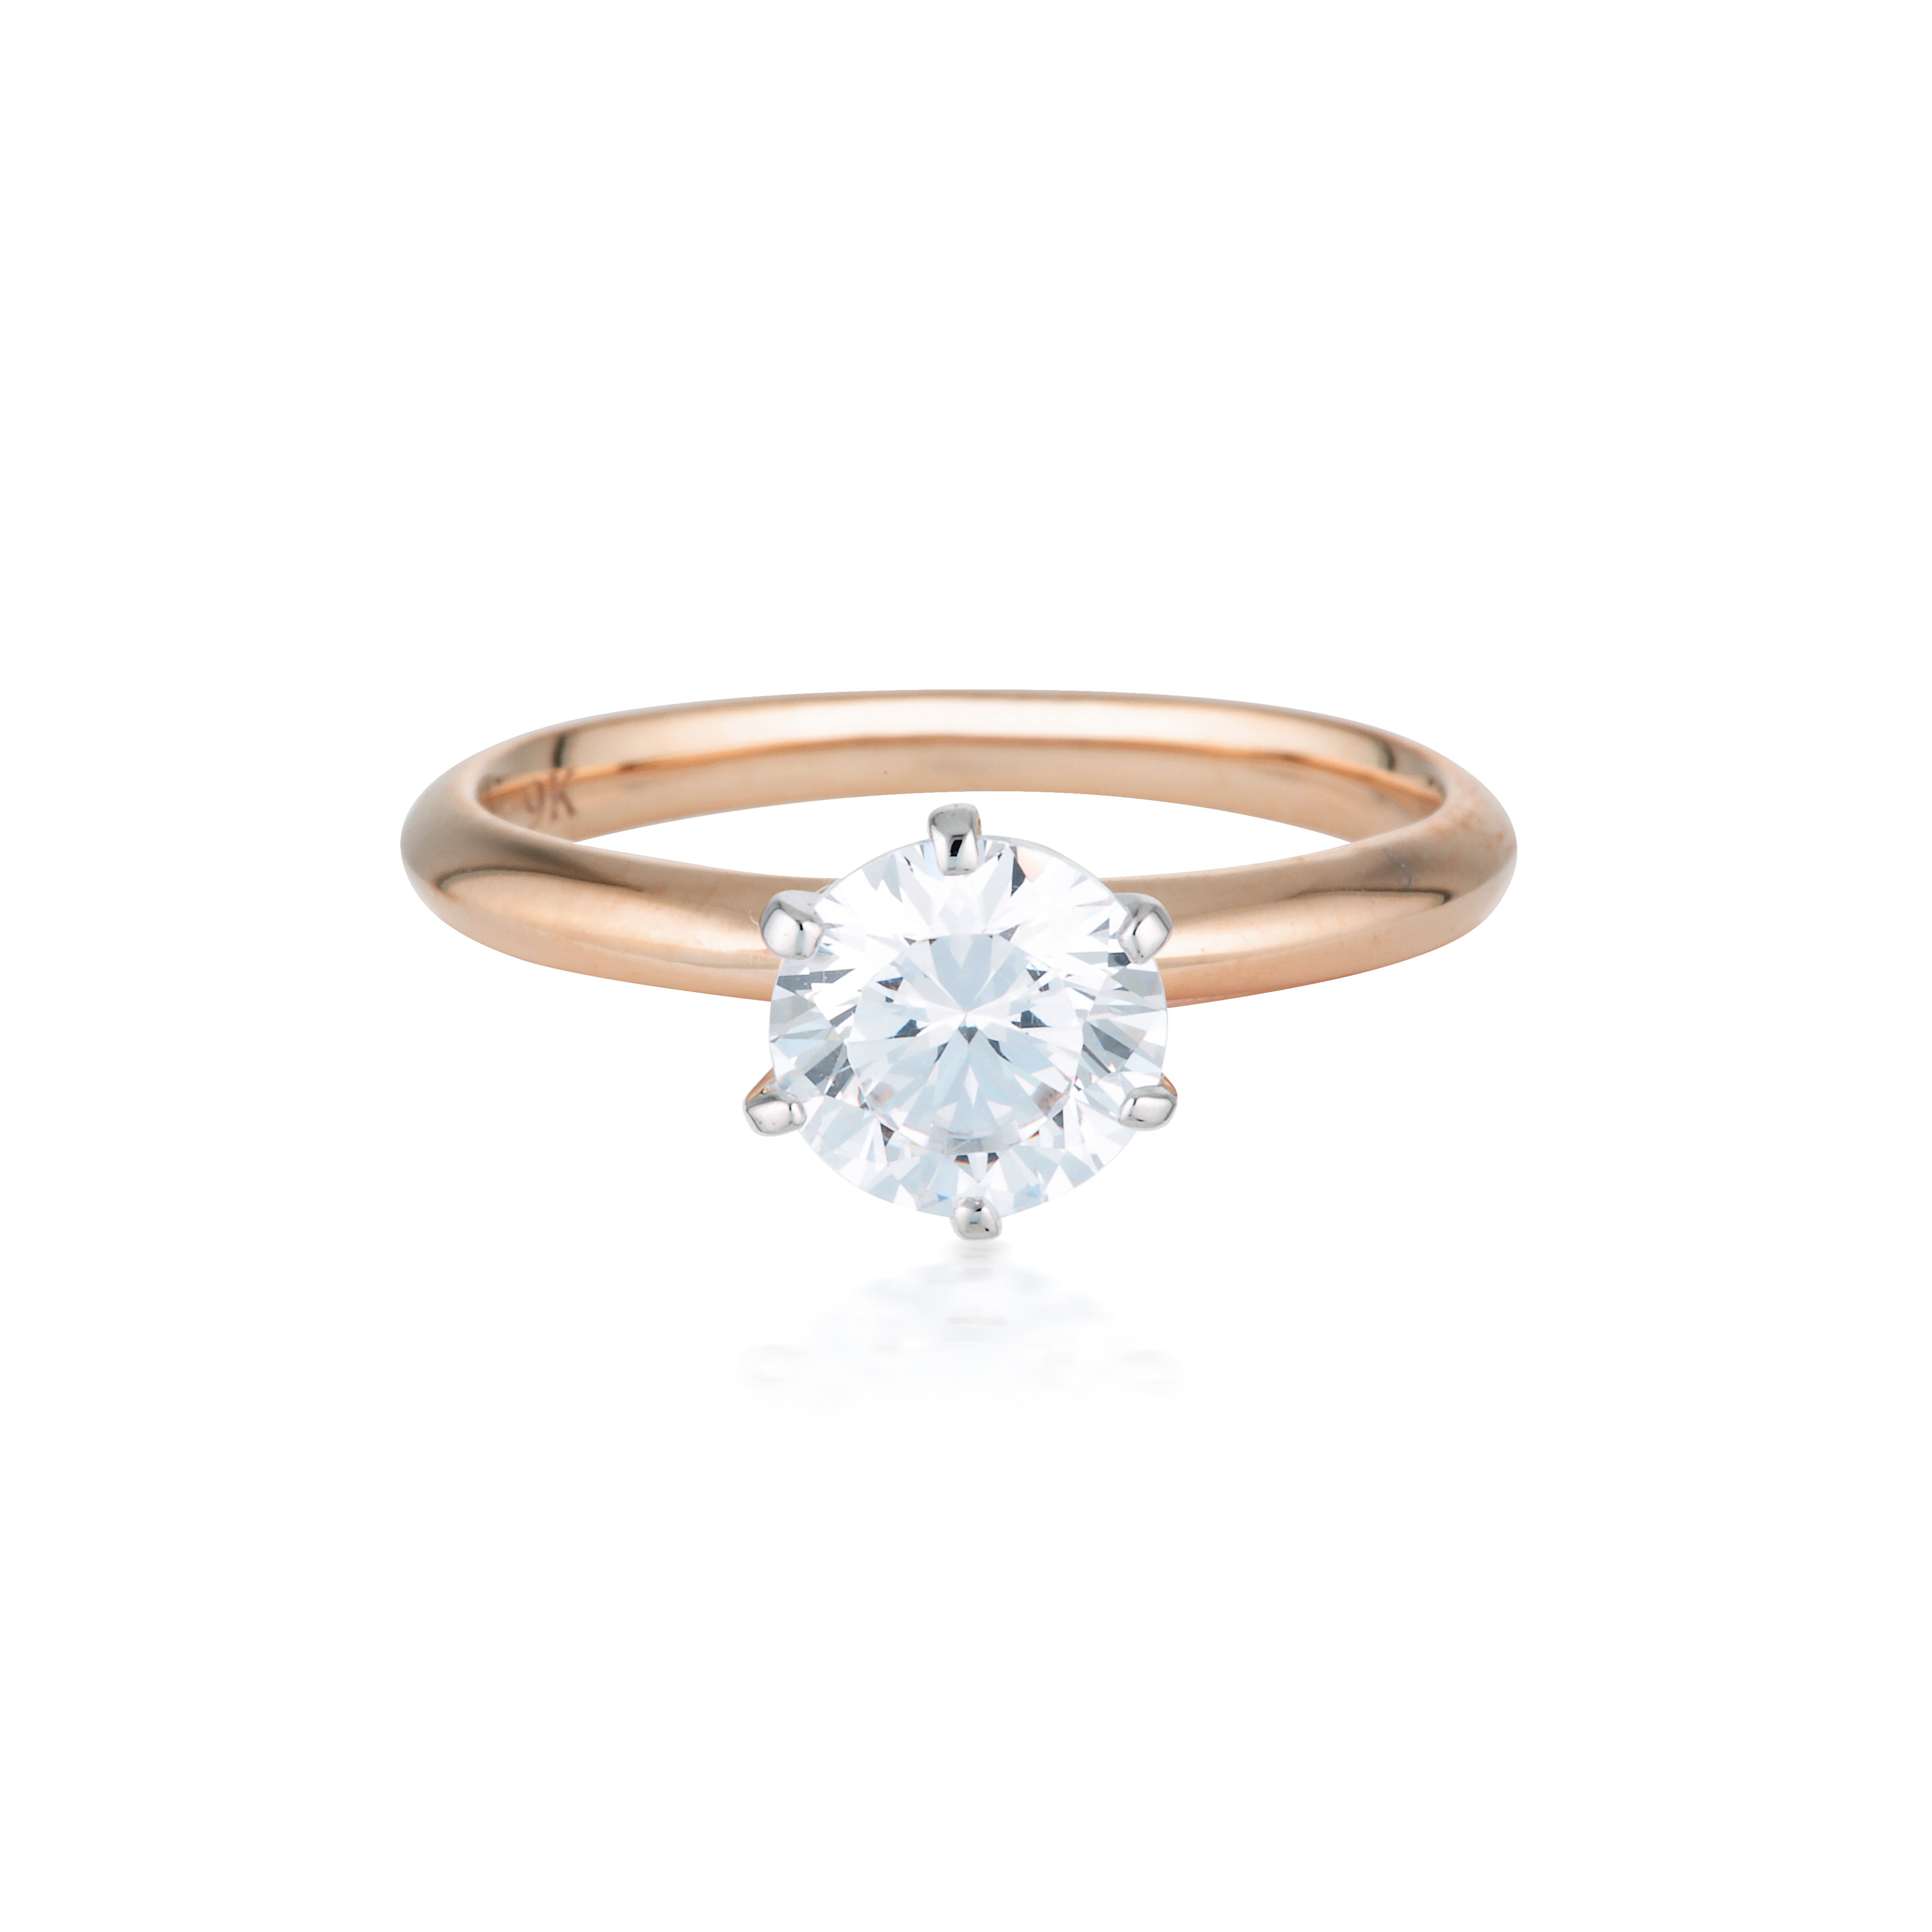 ROUND BRILLIANT CUT 1.25CTW MOISSANITE SOLITAIRE WITH KNIFE EDGE BAND IN ROSE GOLD